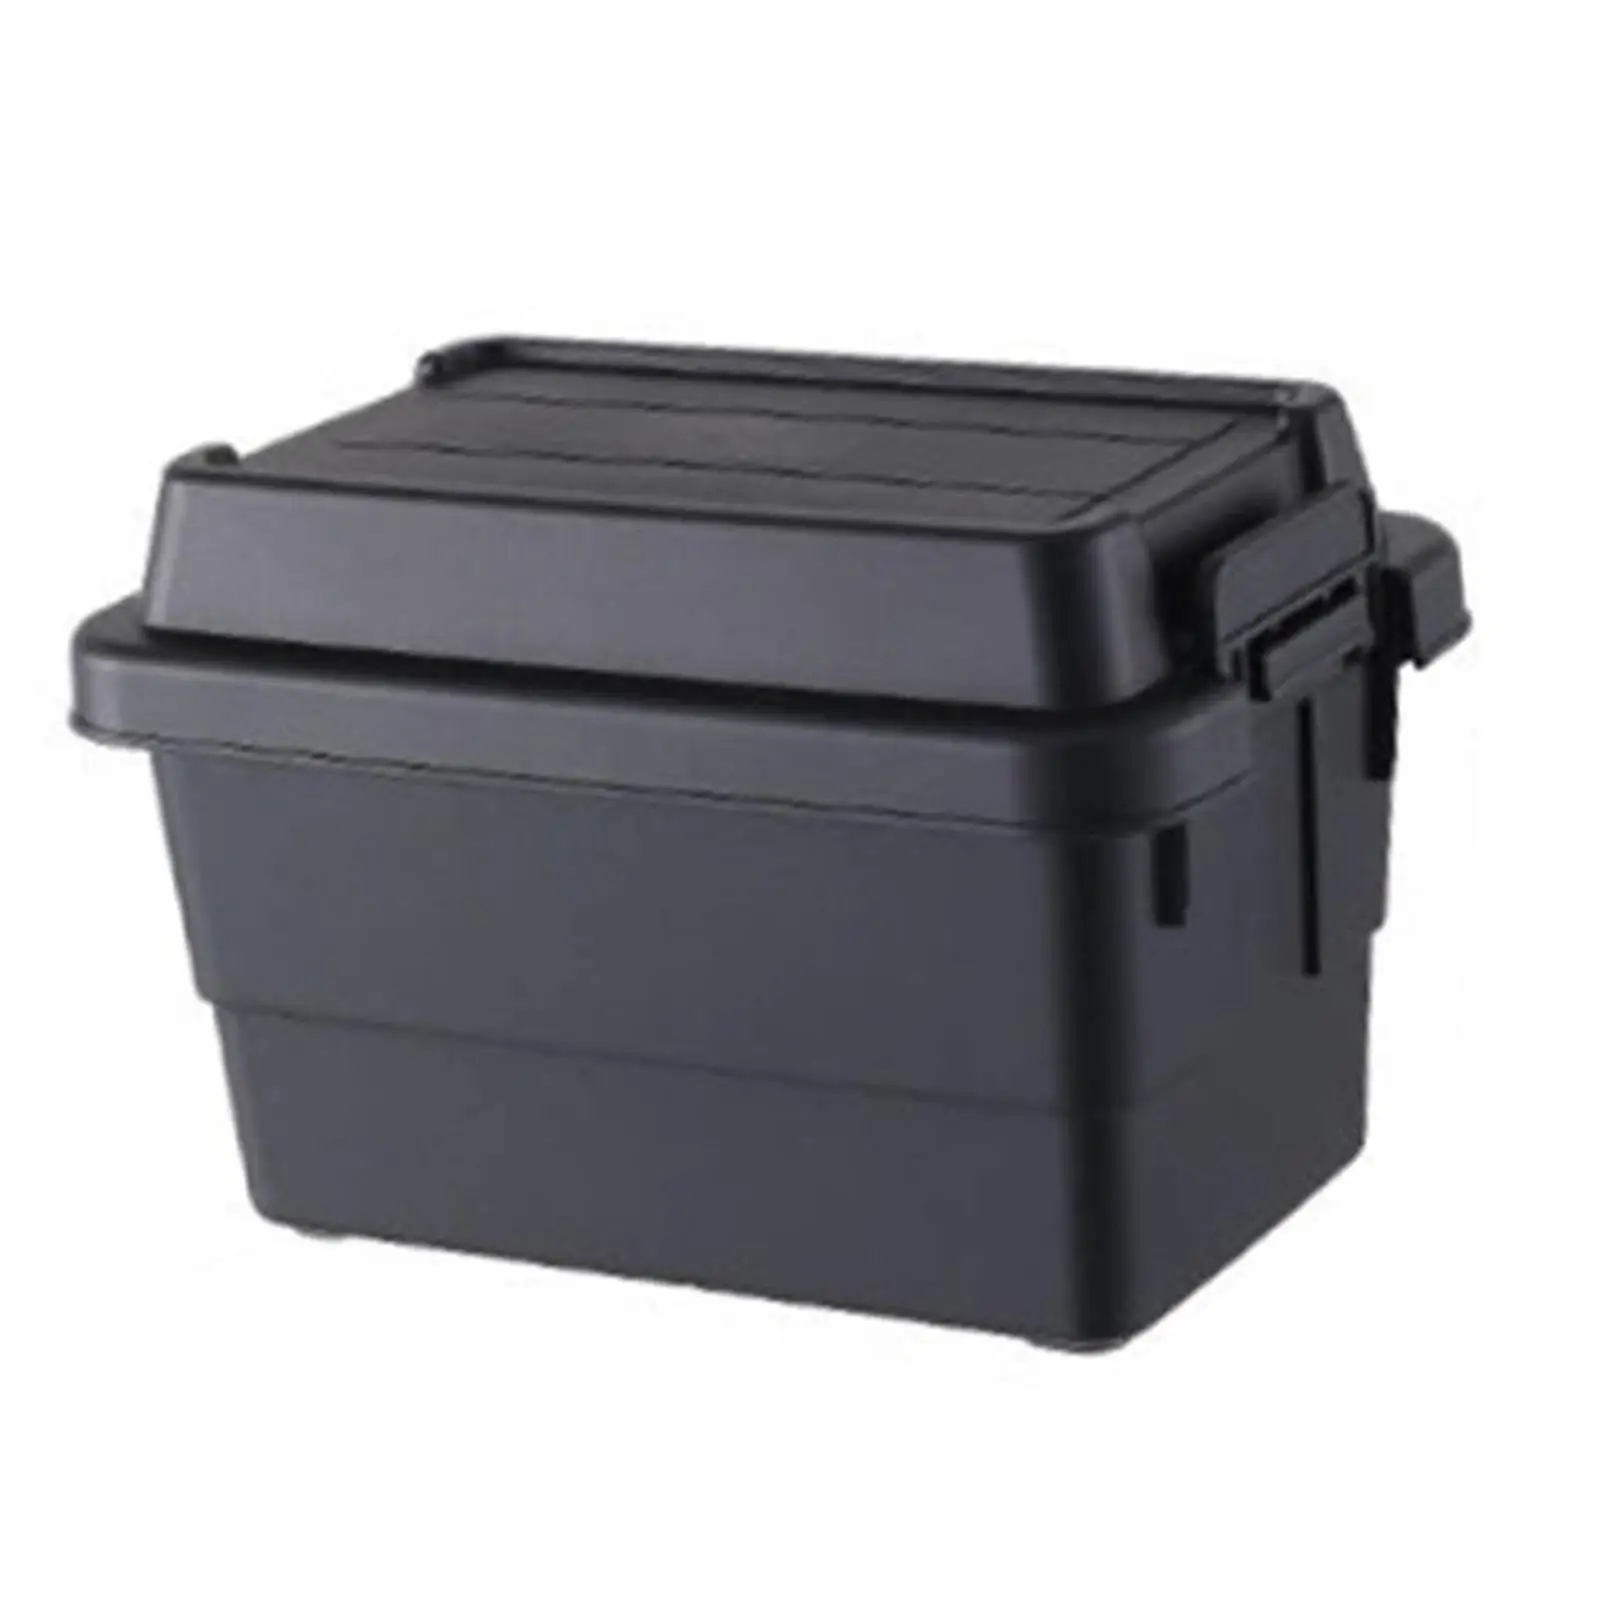 Camping Storage Box Waterproof Portable Storage Bin with Lid for Barbecue Cooking Fishing